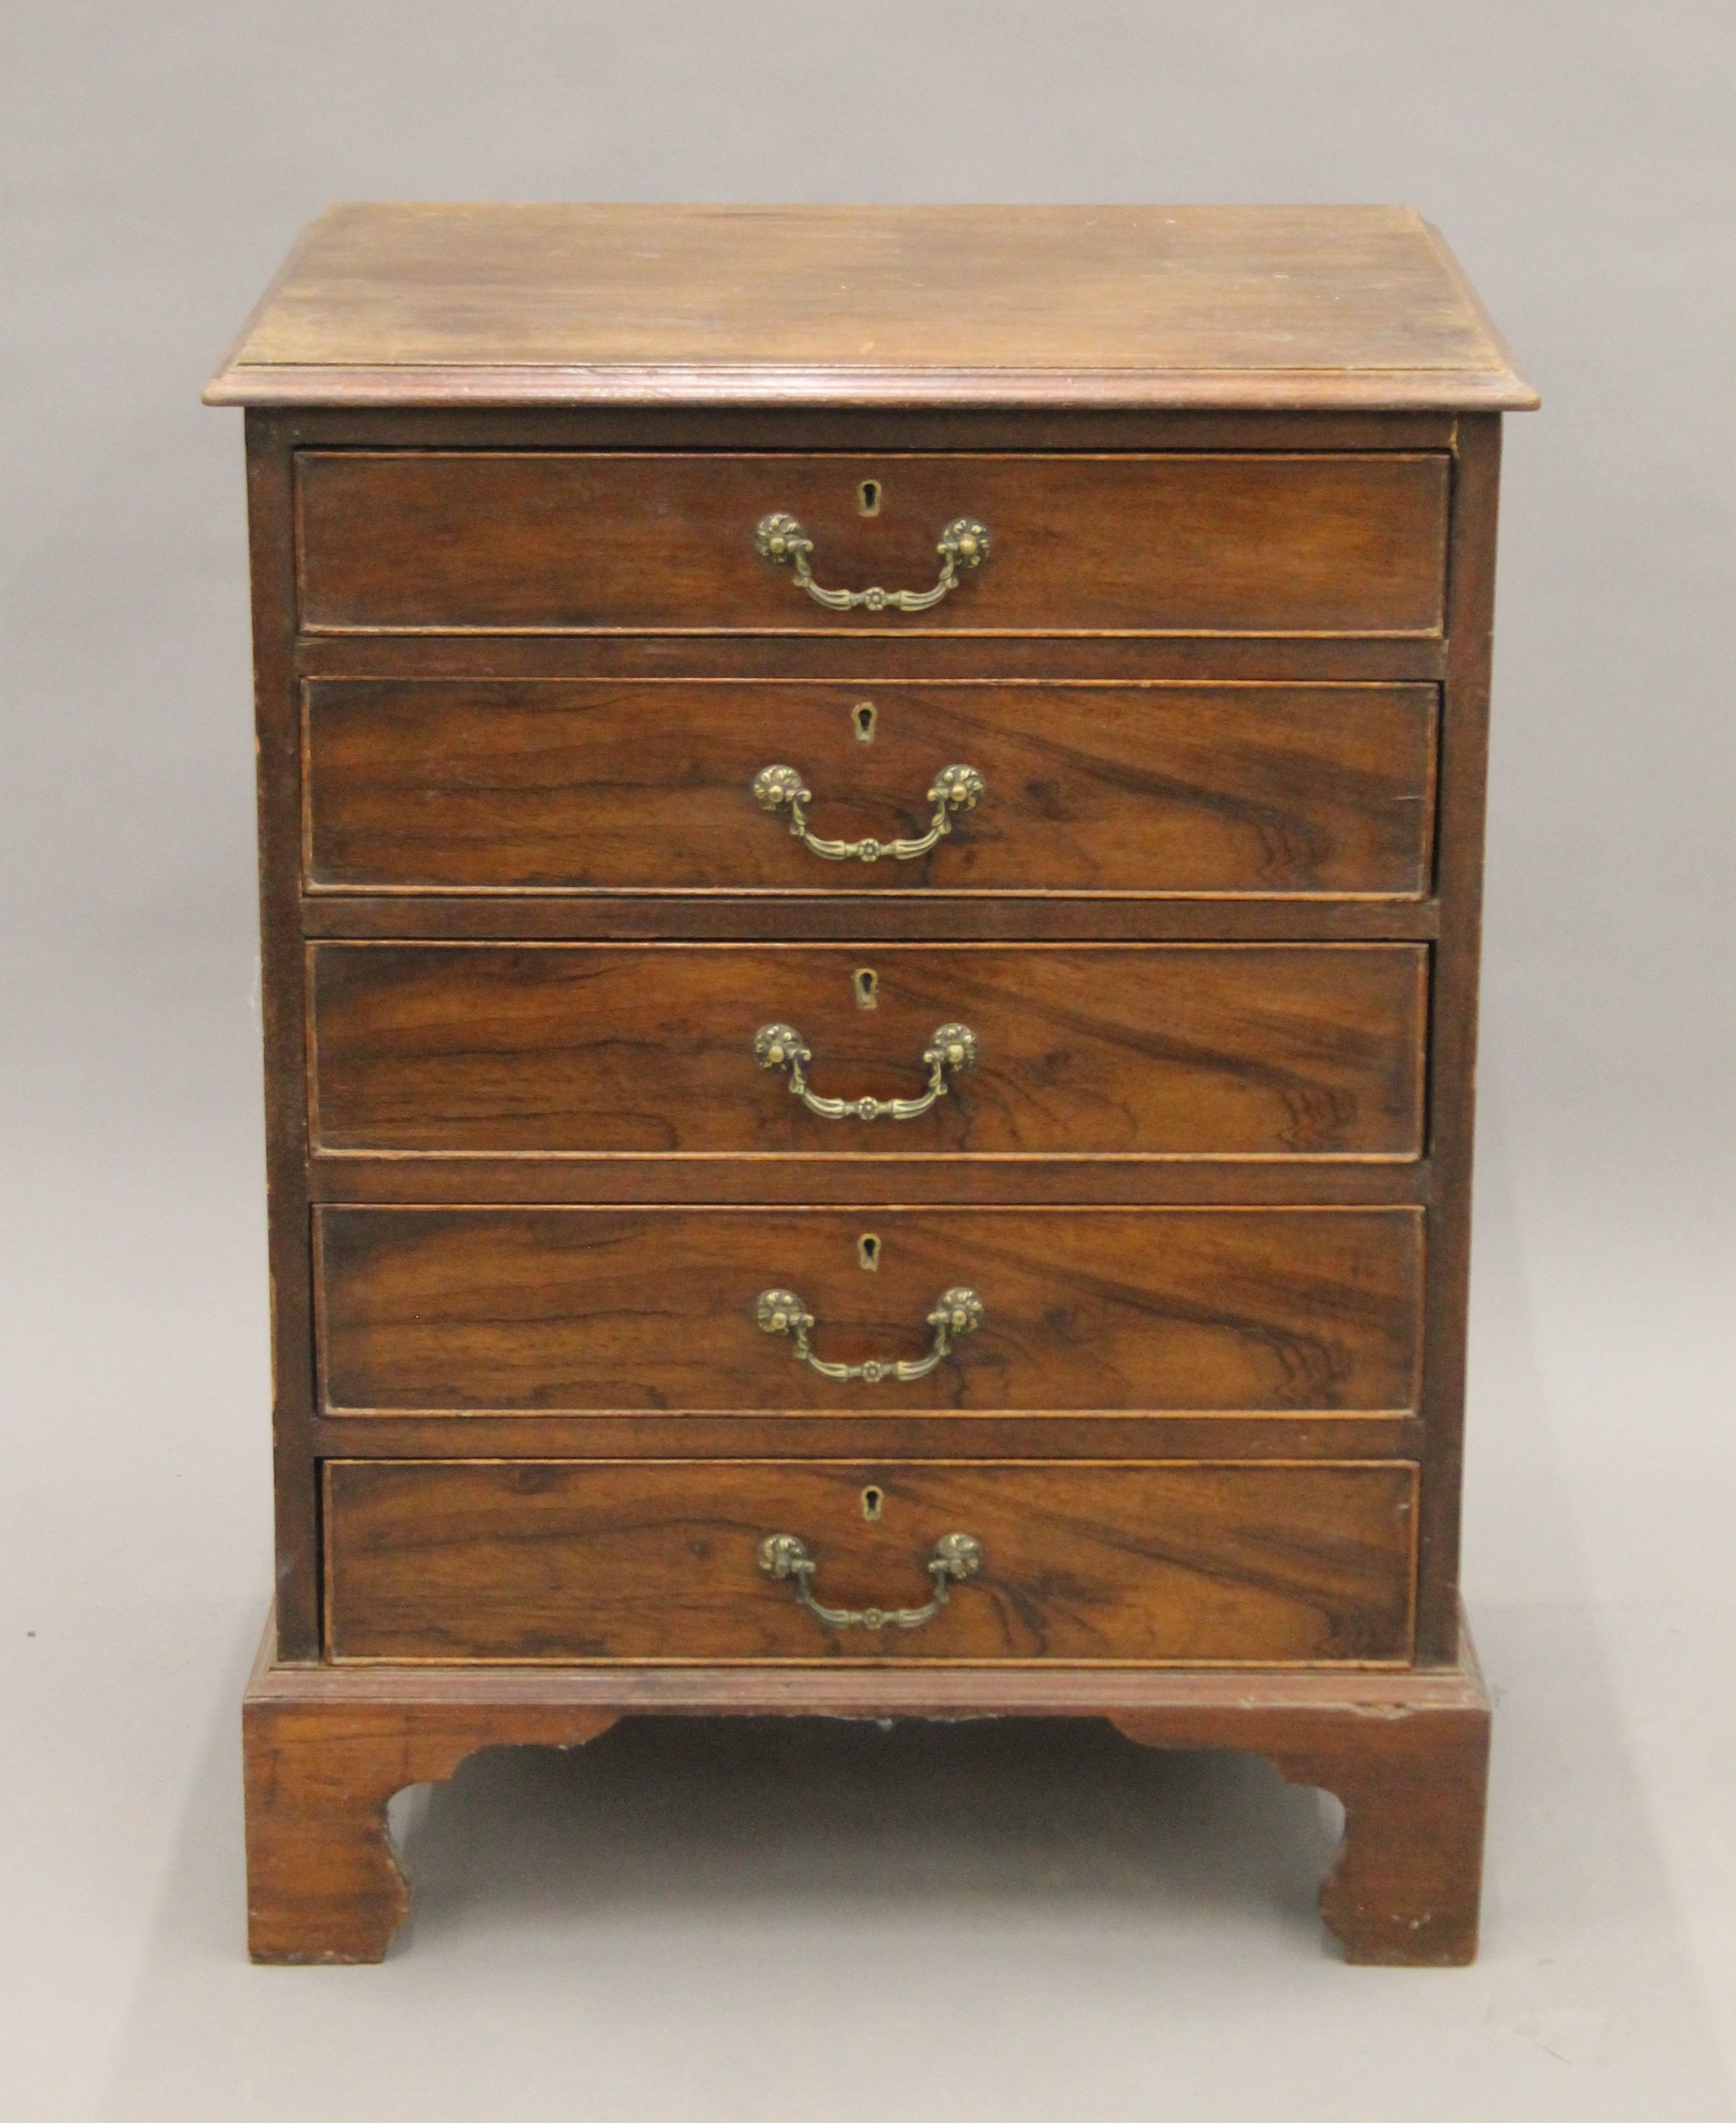 A 19th century five drawer mahogany chest of drawers. 62.5 cm wide.